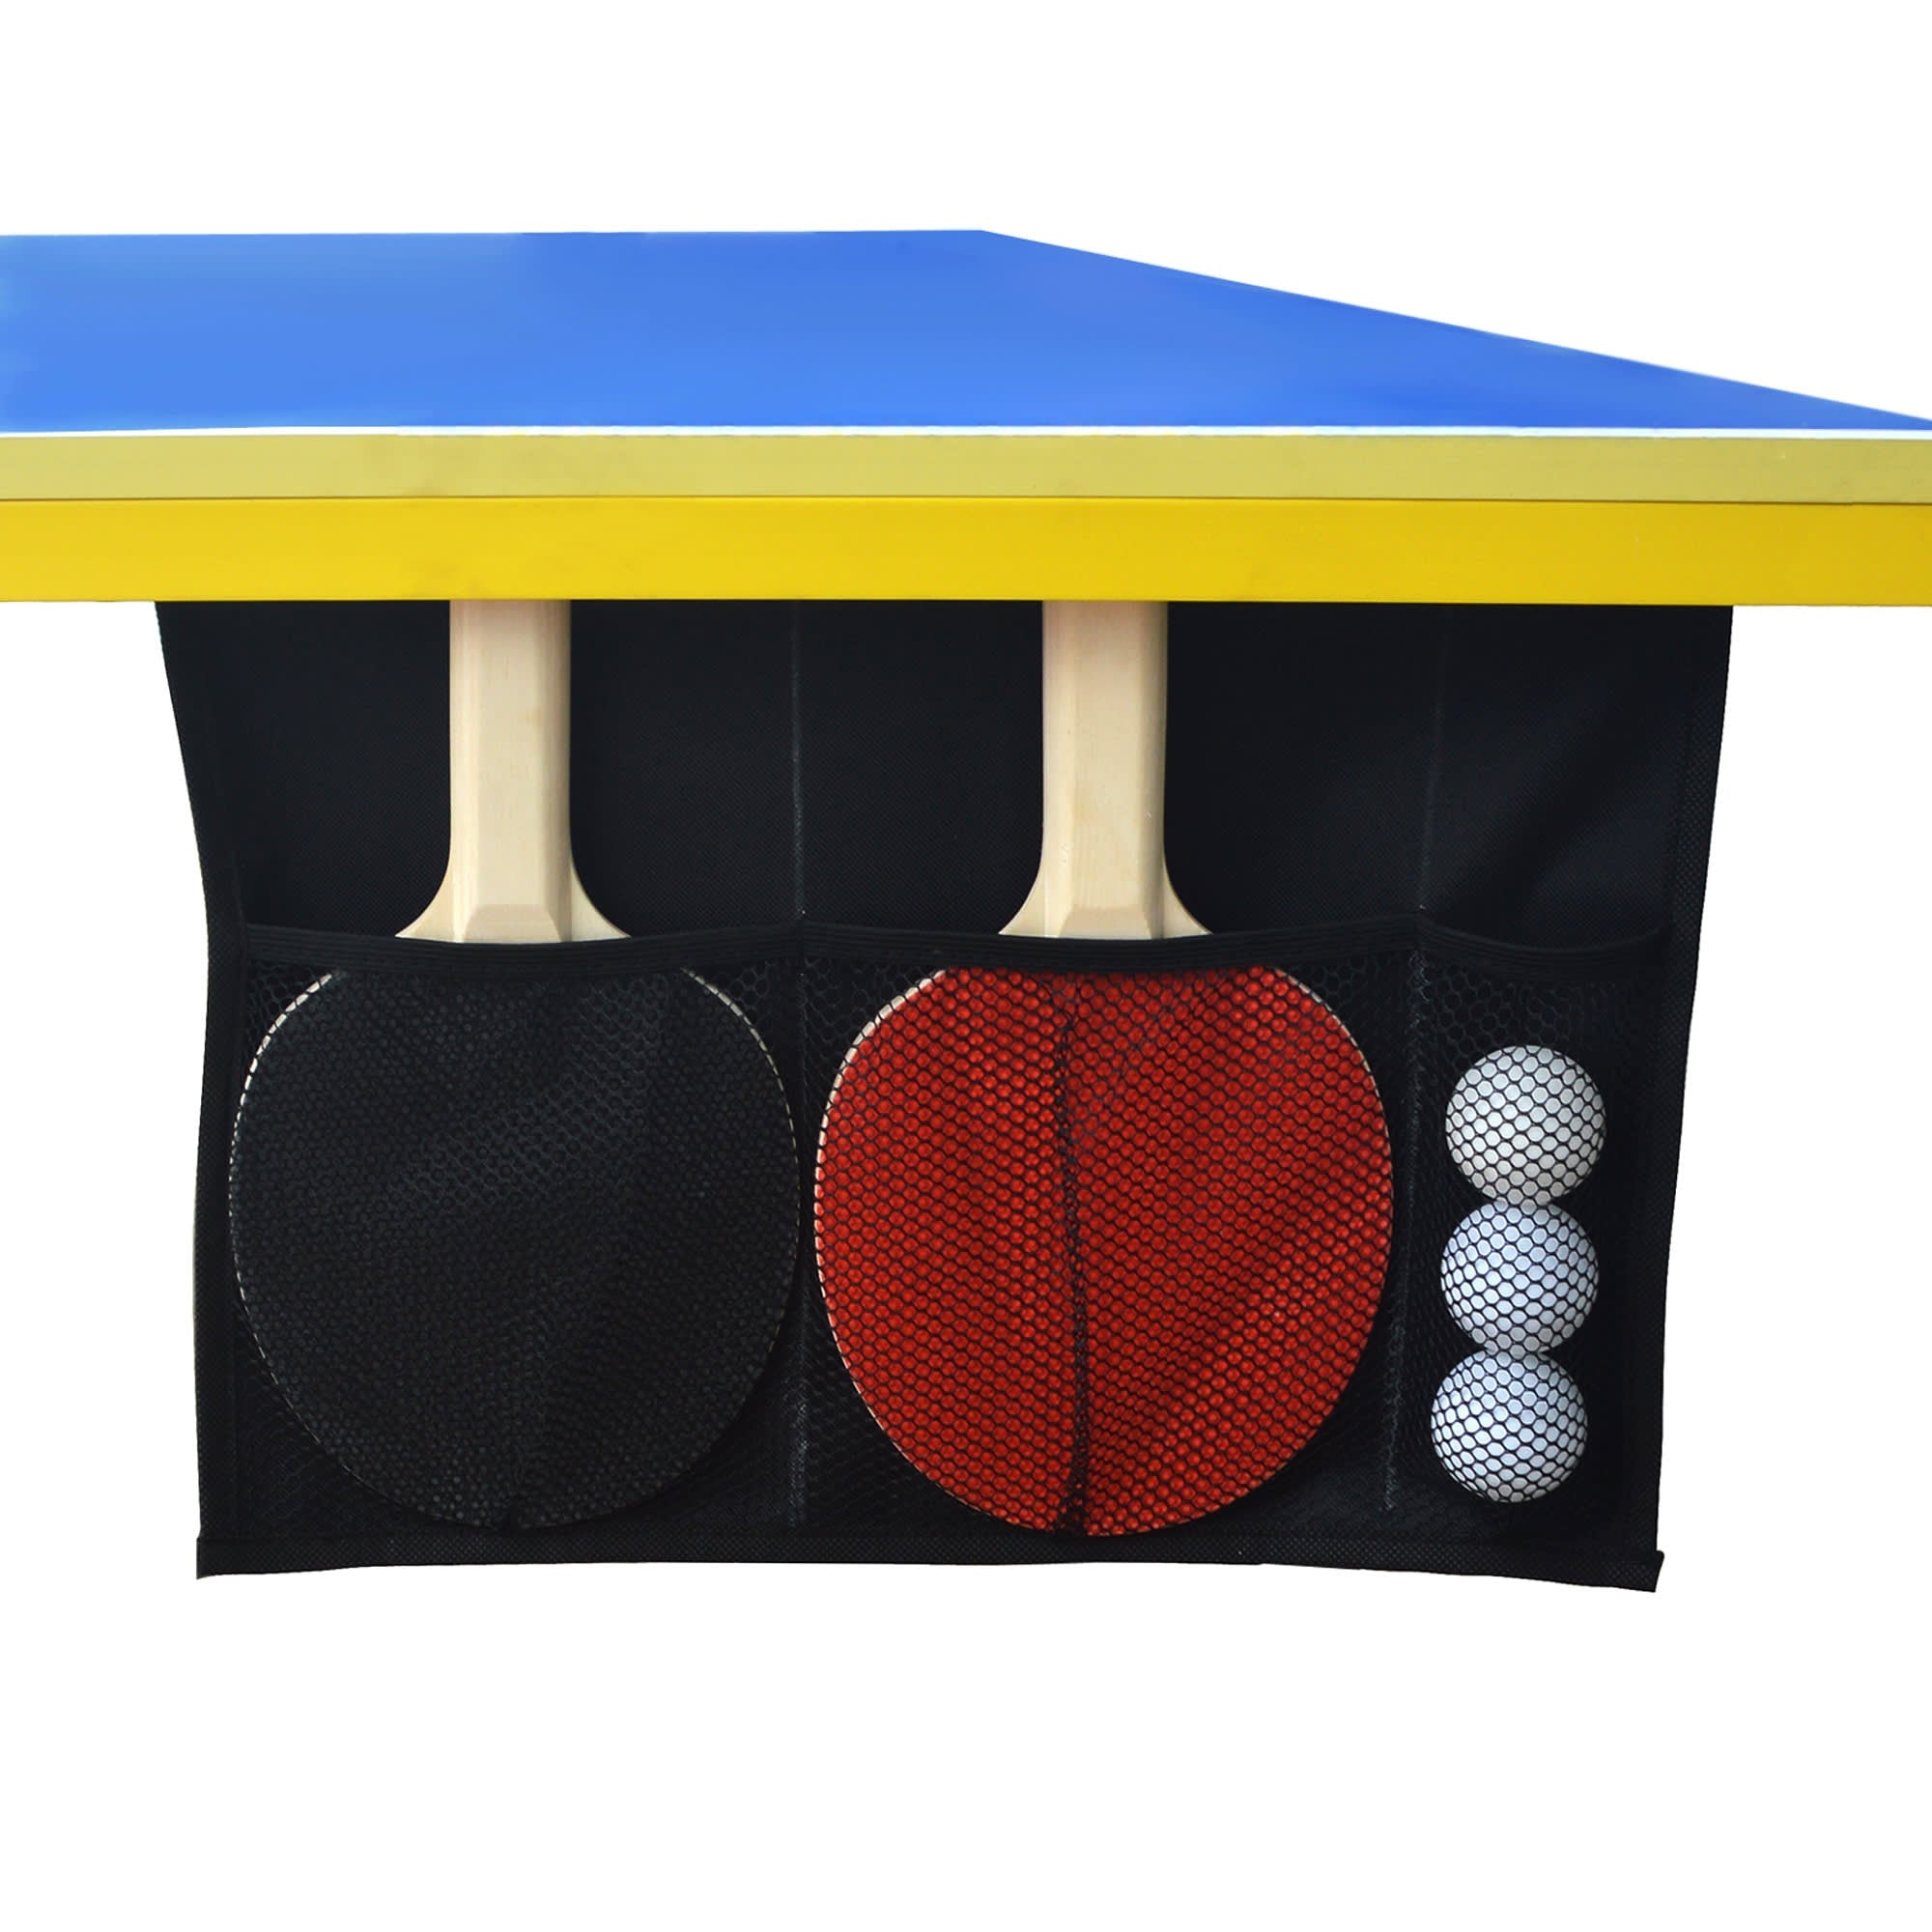 Table Tennis Table Bounce Back - 12mm  - Blue